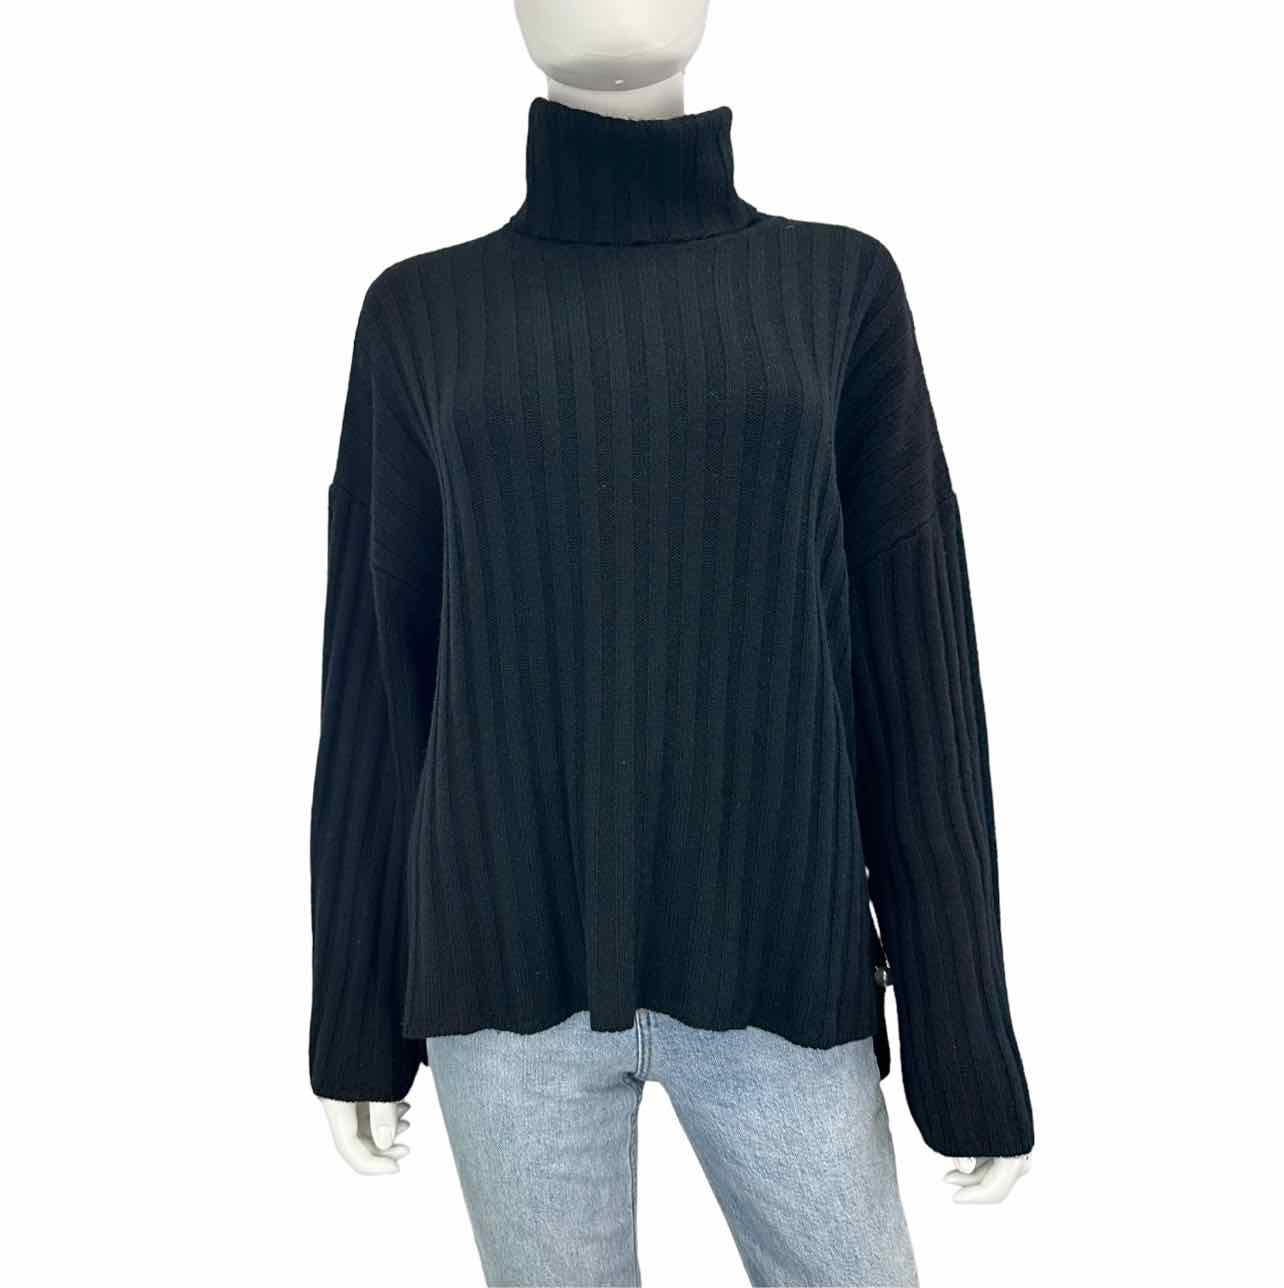 MILLY Black 100% Cashmere Ribbed Turtleneck Sweater Size S